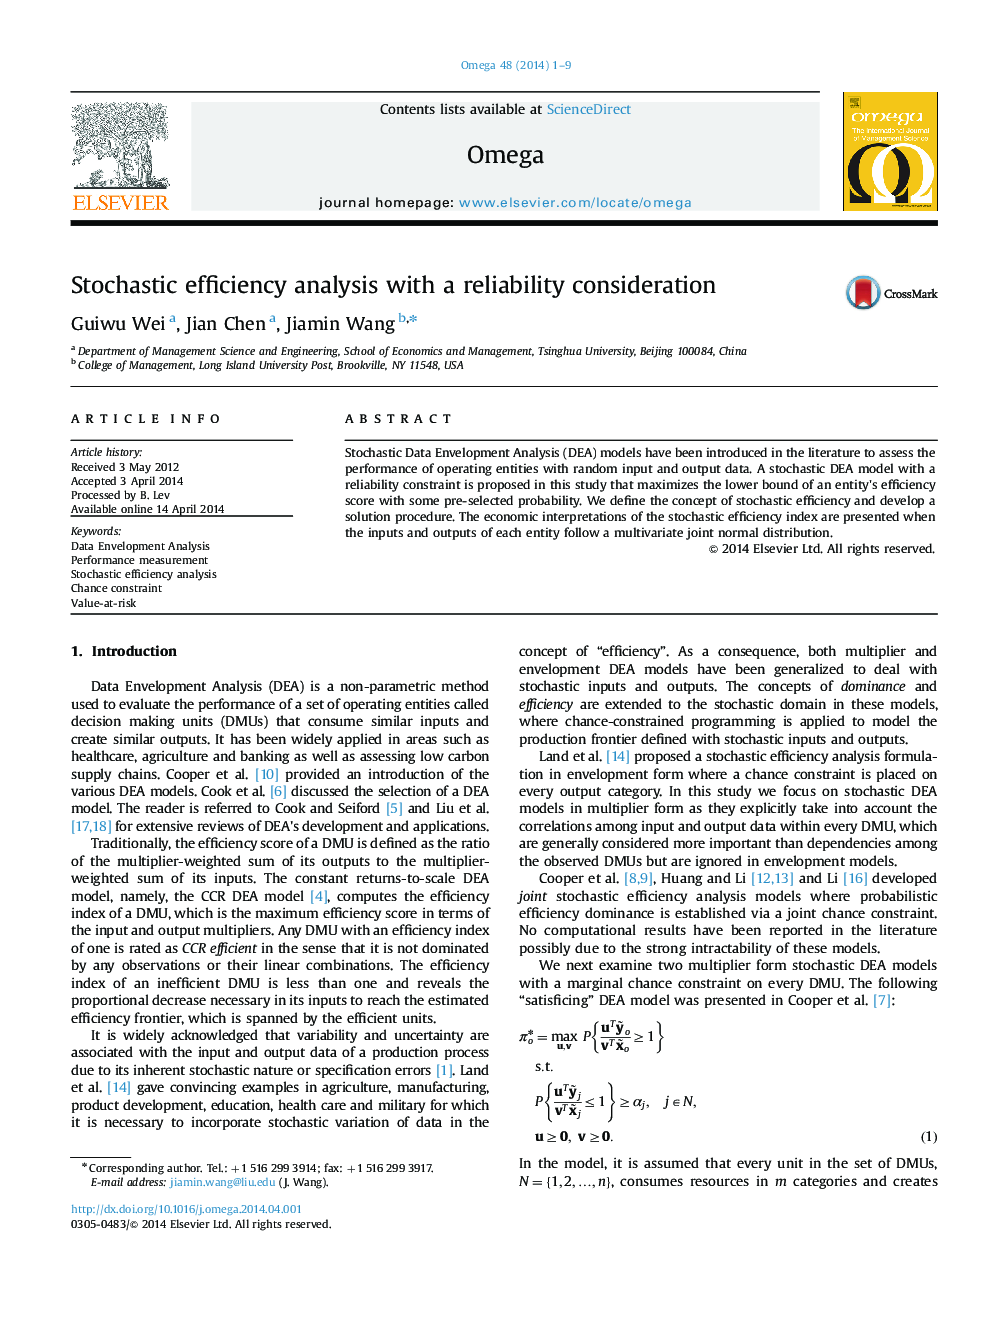 Stochastic efficiency analysis with a reliability consideration